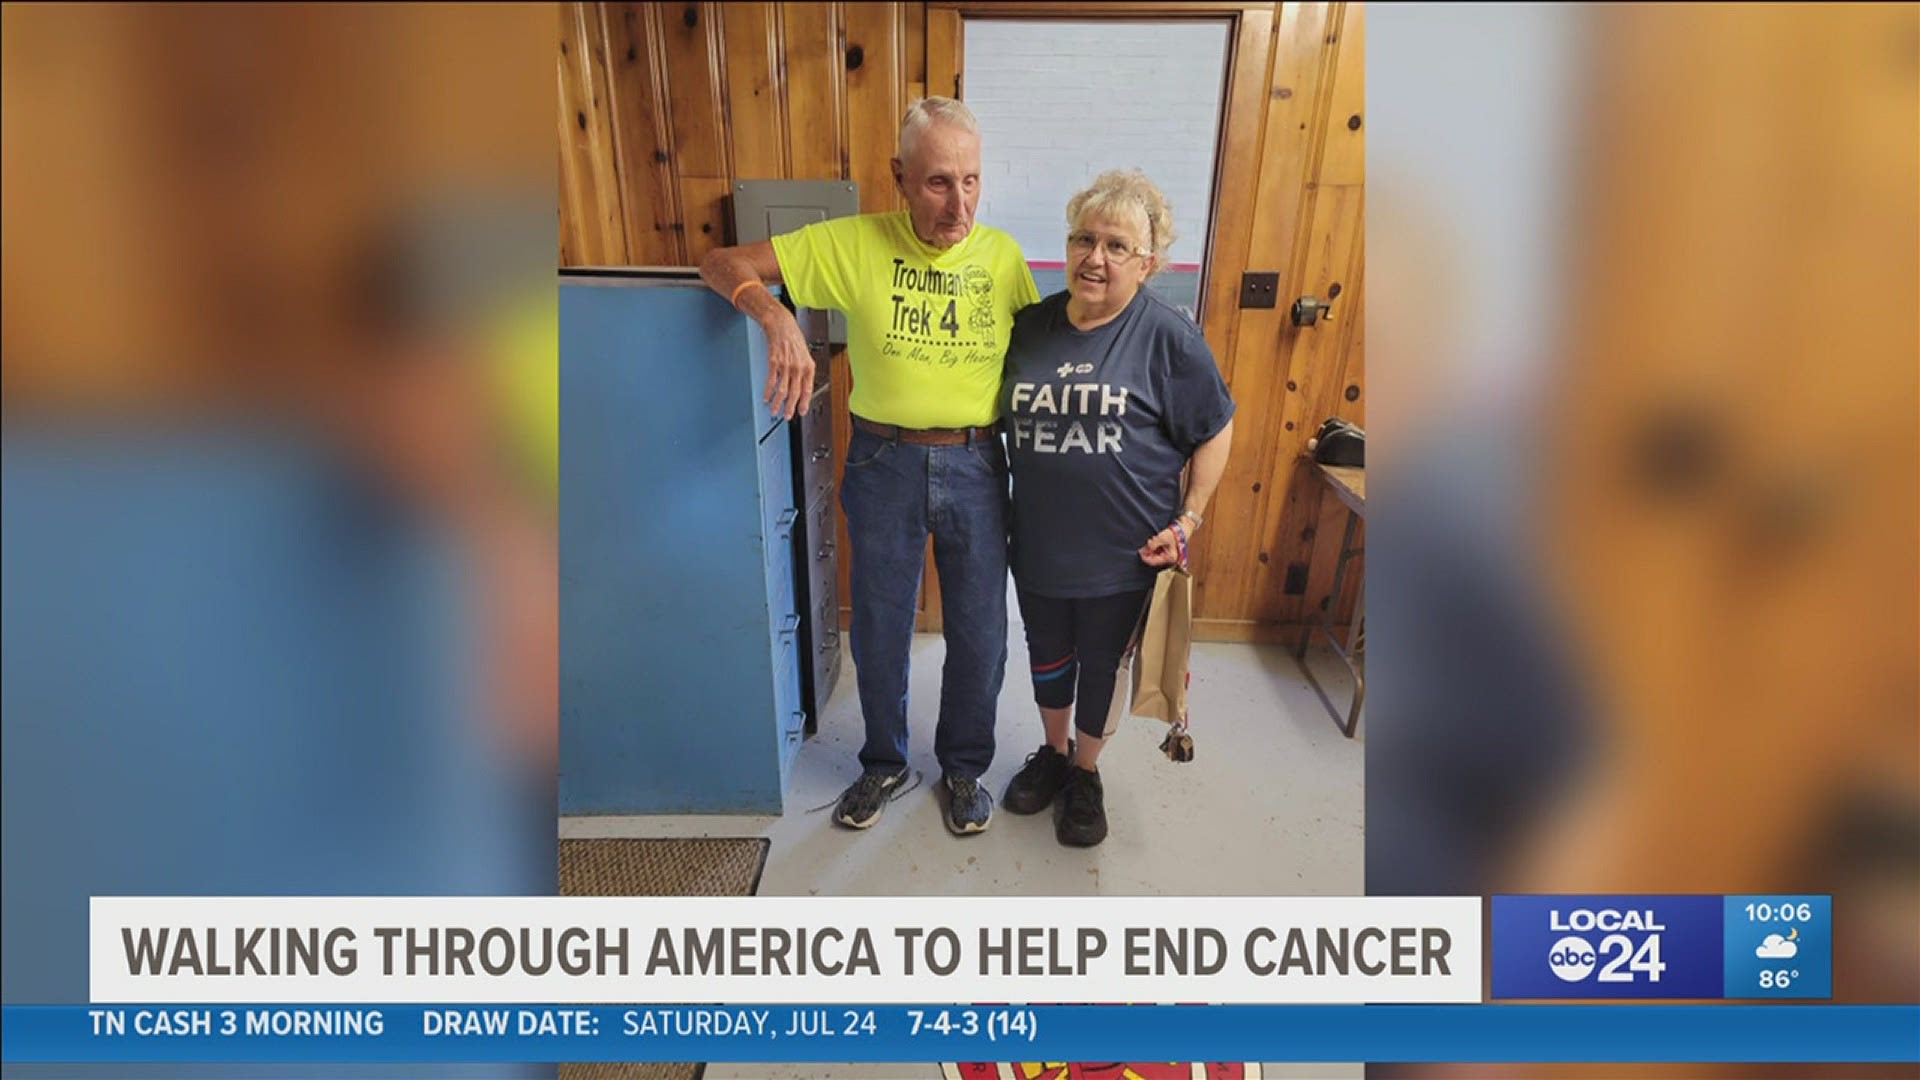 Dean Troutman is walking from Illinois to Texas to help fight childhood cancer. His goal is to raise $1 million for St. Jude Children's Research Hospital.